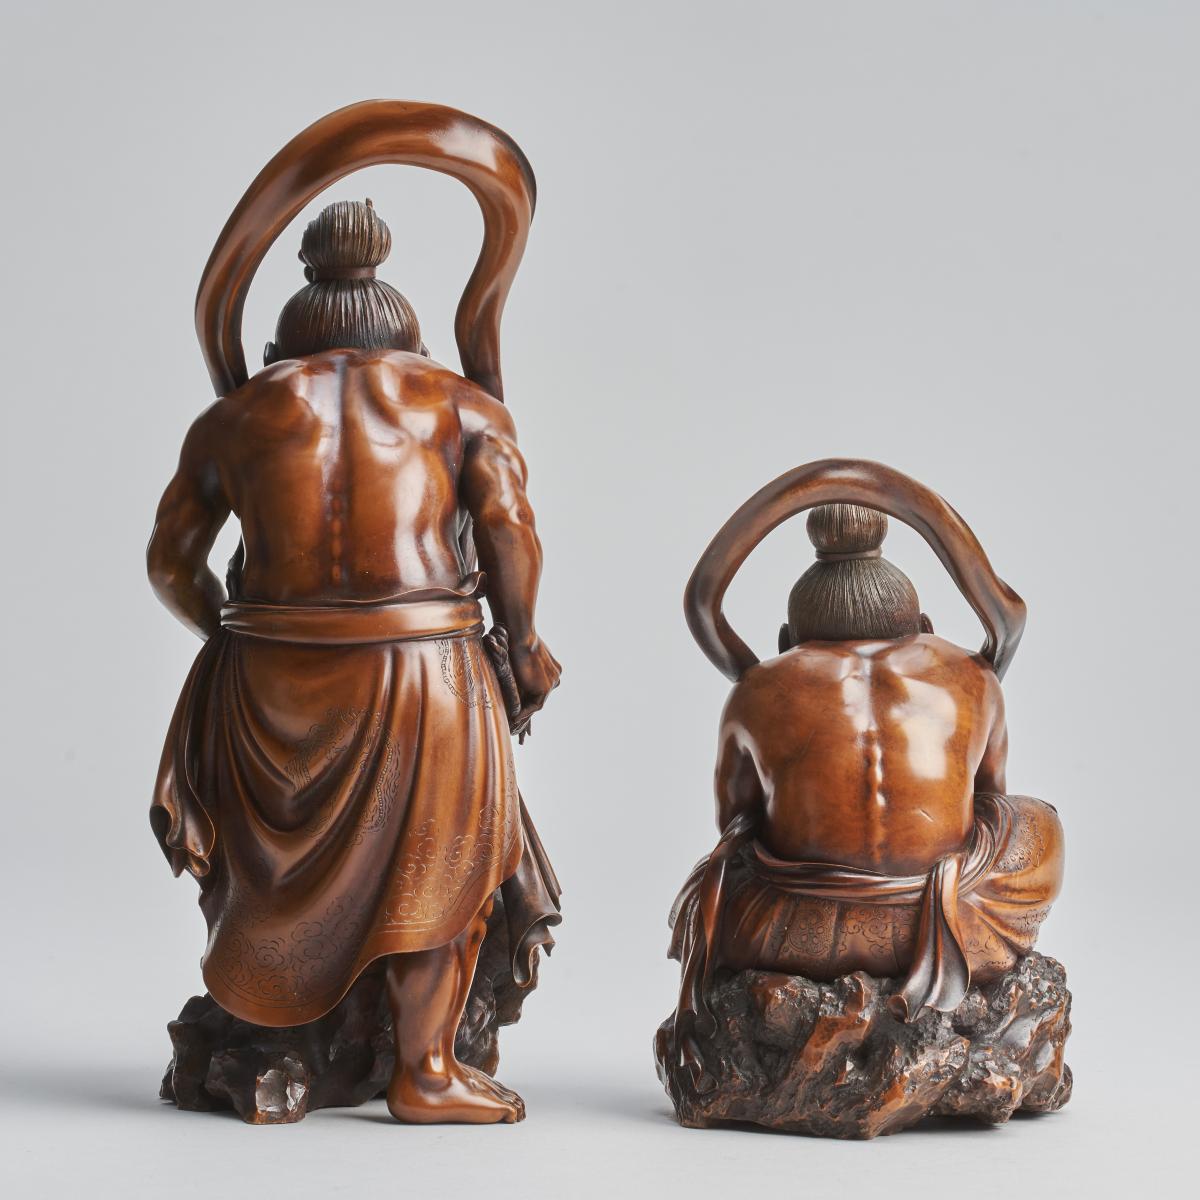 A fascinating, Japanese wood-carved Okimono pair of Temple Guardians (Nio)